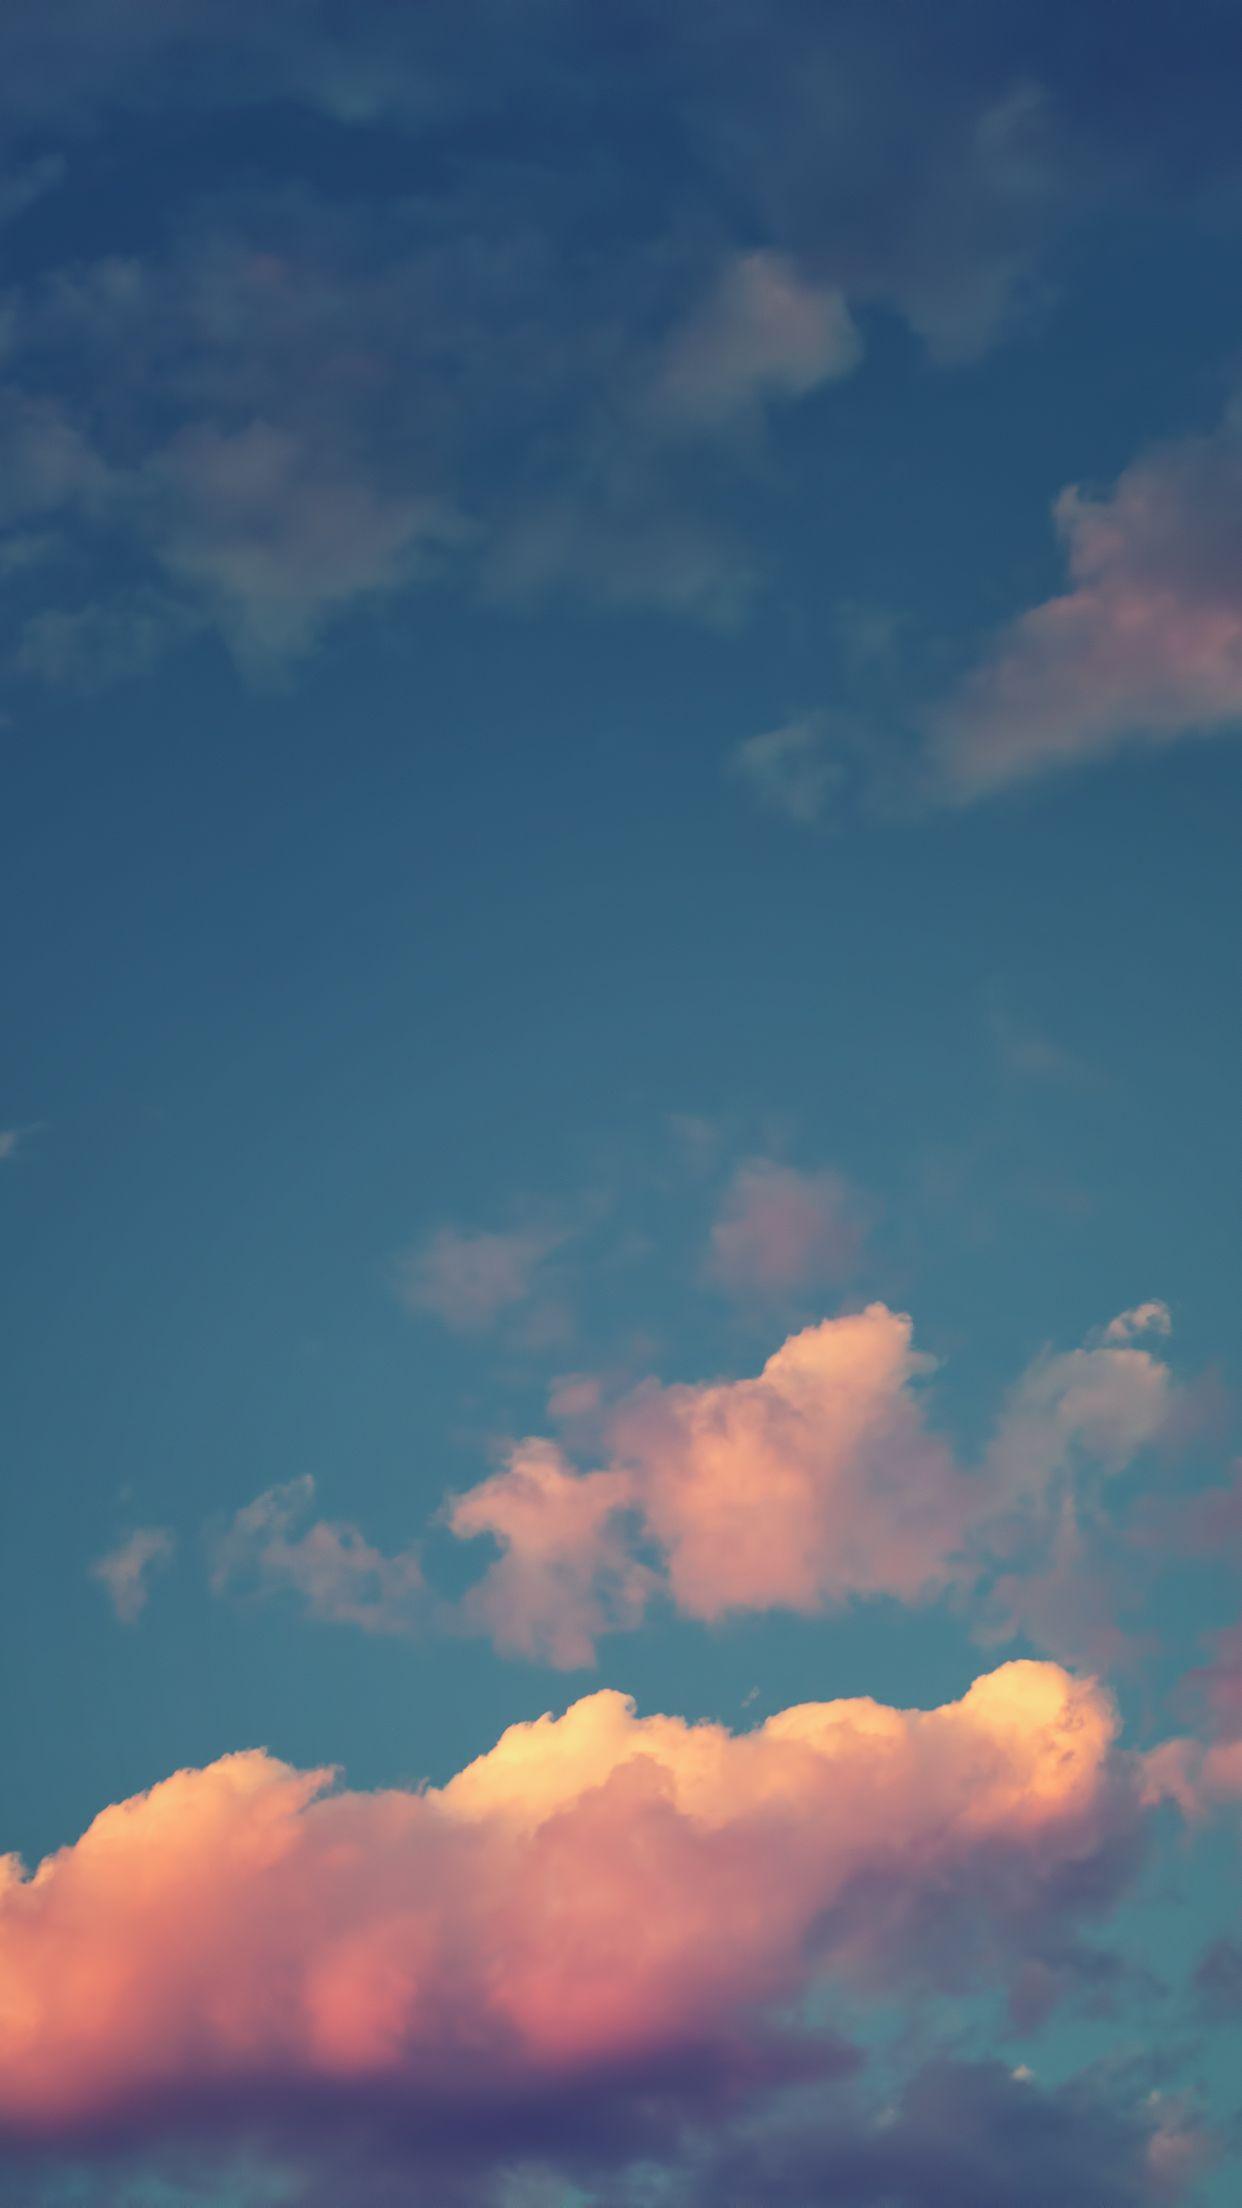 Clouds 4K Wallpaper Iphone Sky Cloud Wallpapers Images In 4k And 8k